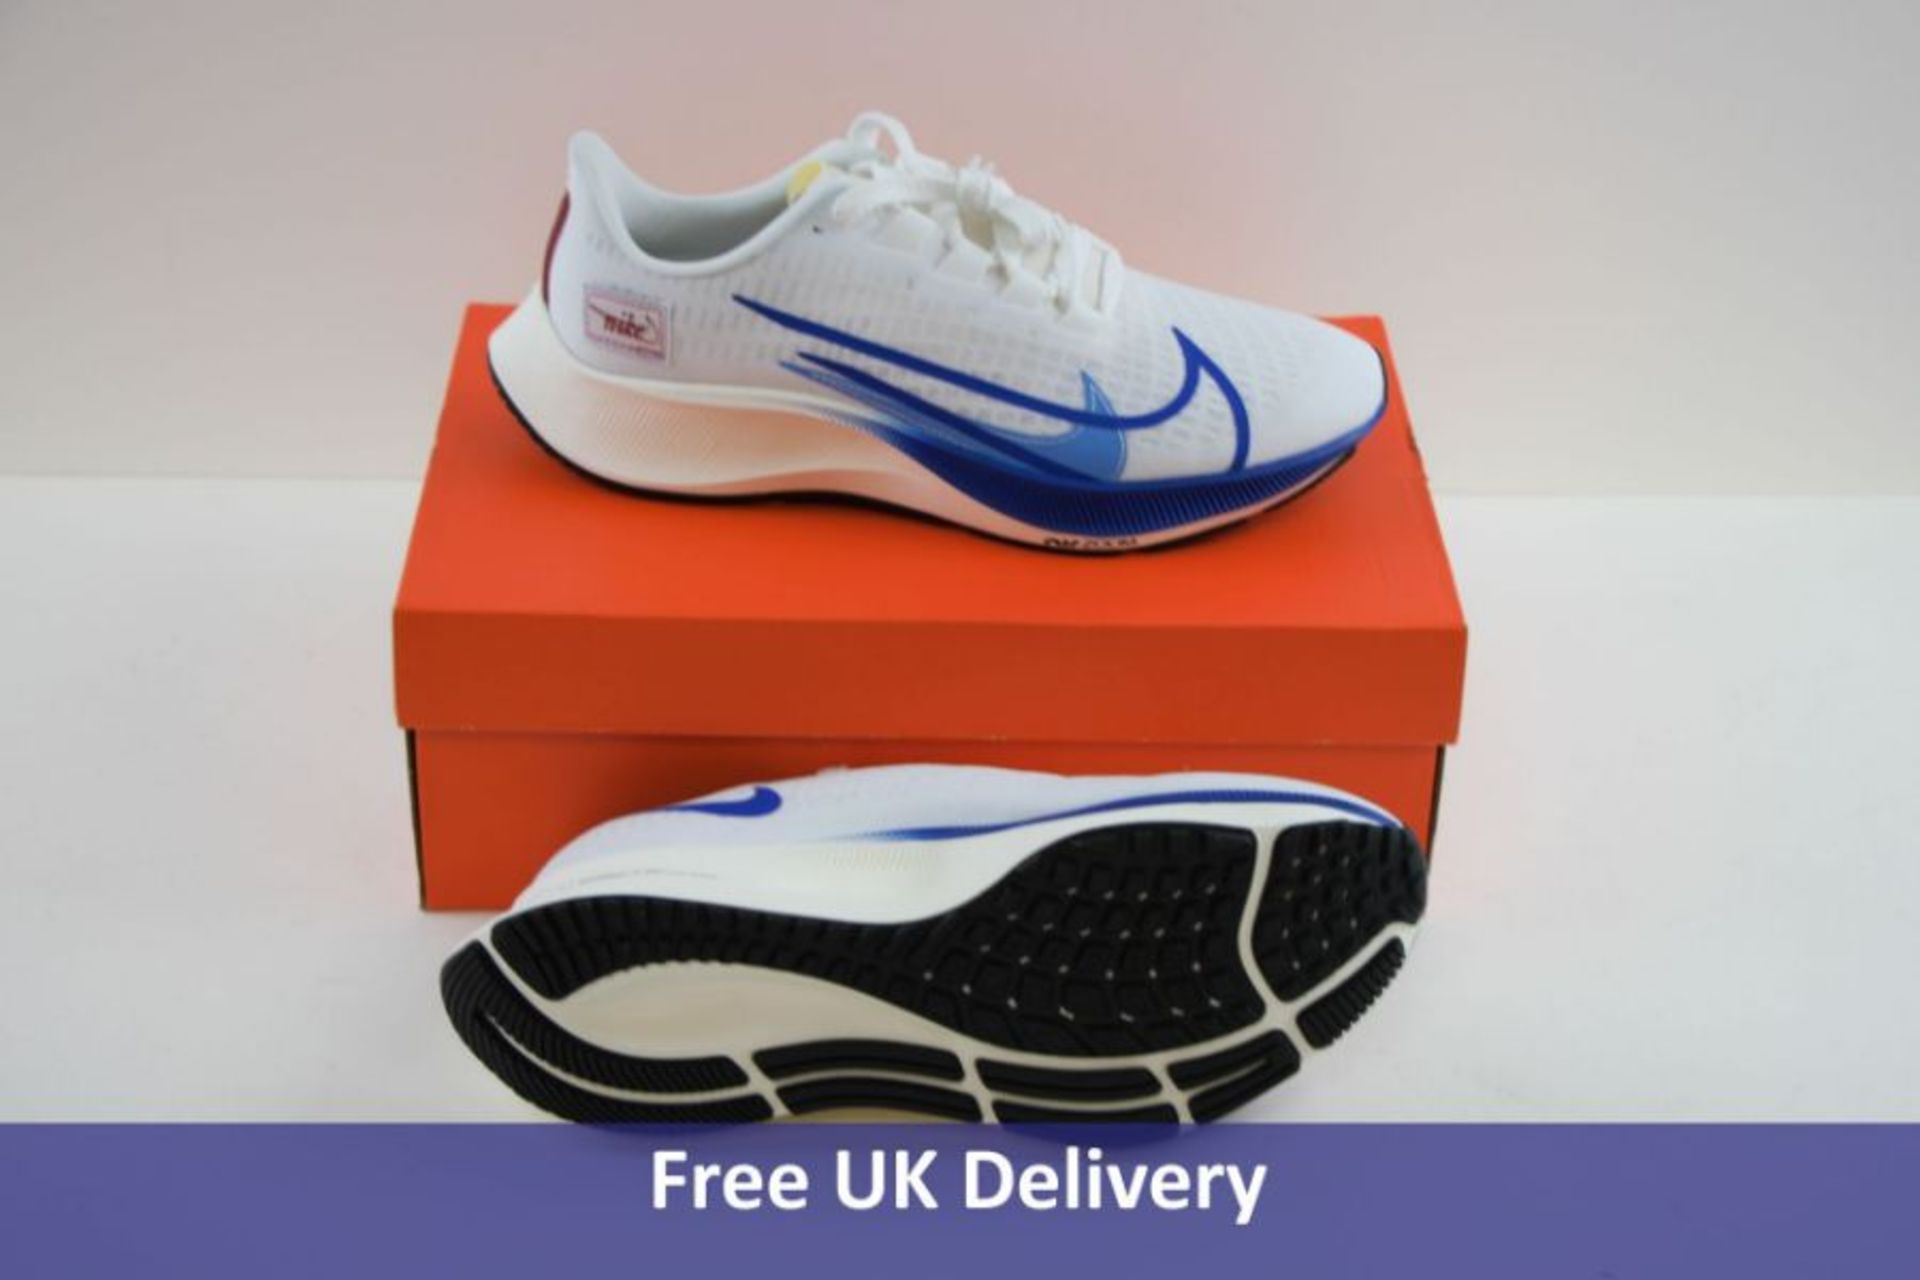 Nike Women's Air Zoom Pegasus 37 PRM Trainers, White, Game Royal and Gym Red Sail, UK 6